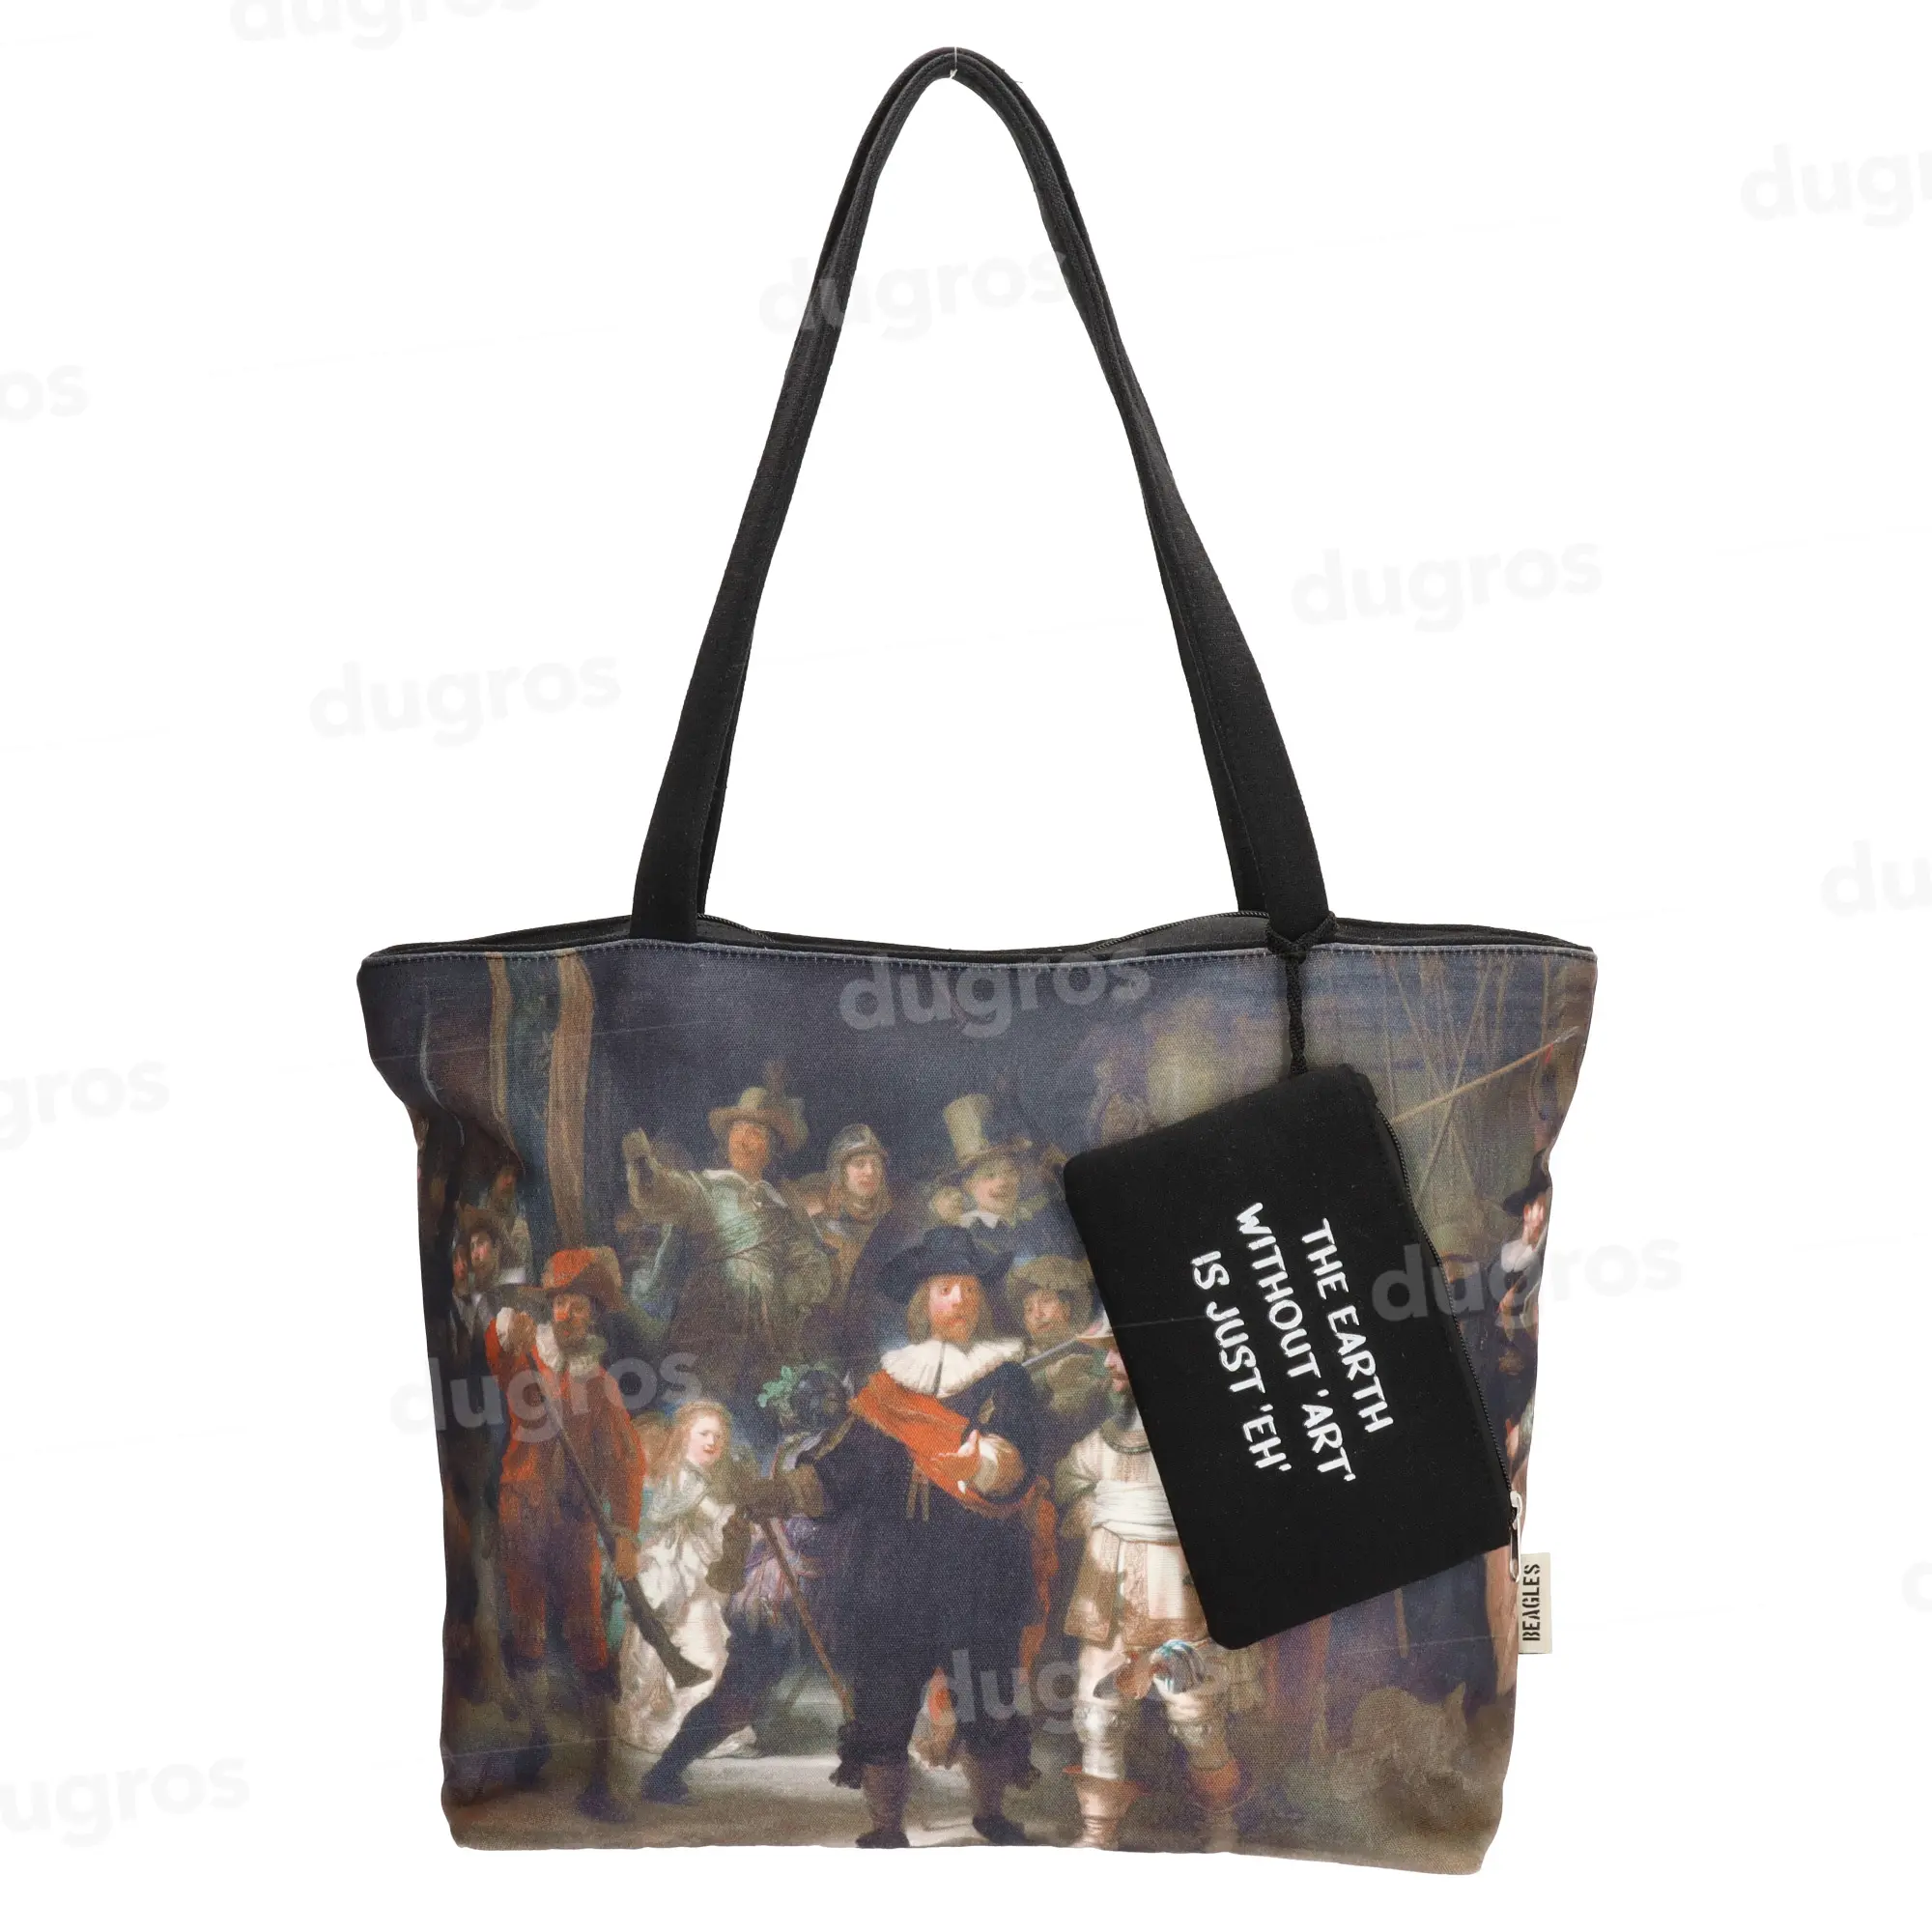 High Quality Canvas Polyester Shopping bag printed with paintings by famous Dutch masters